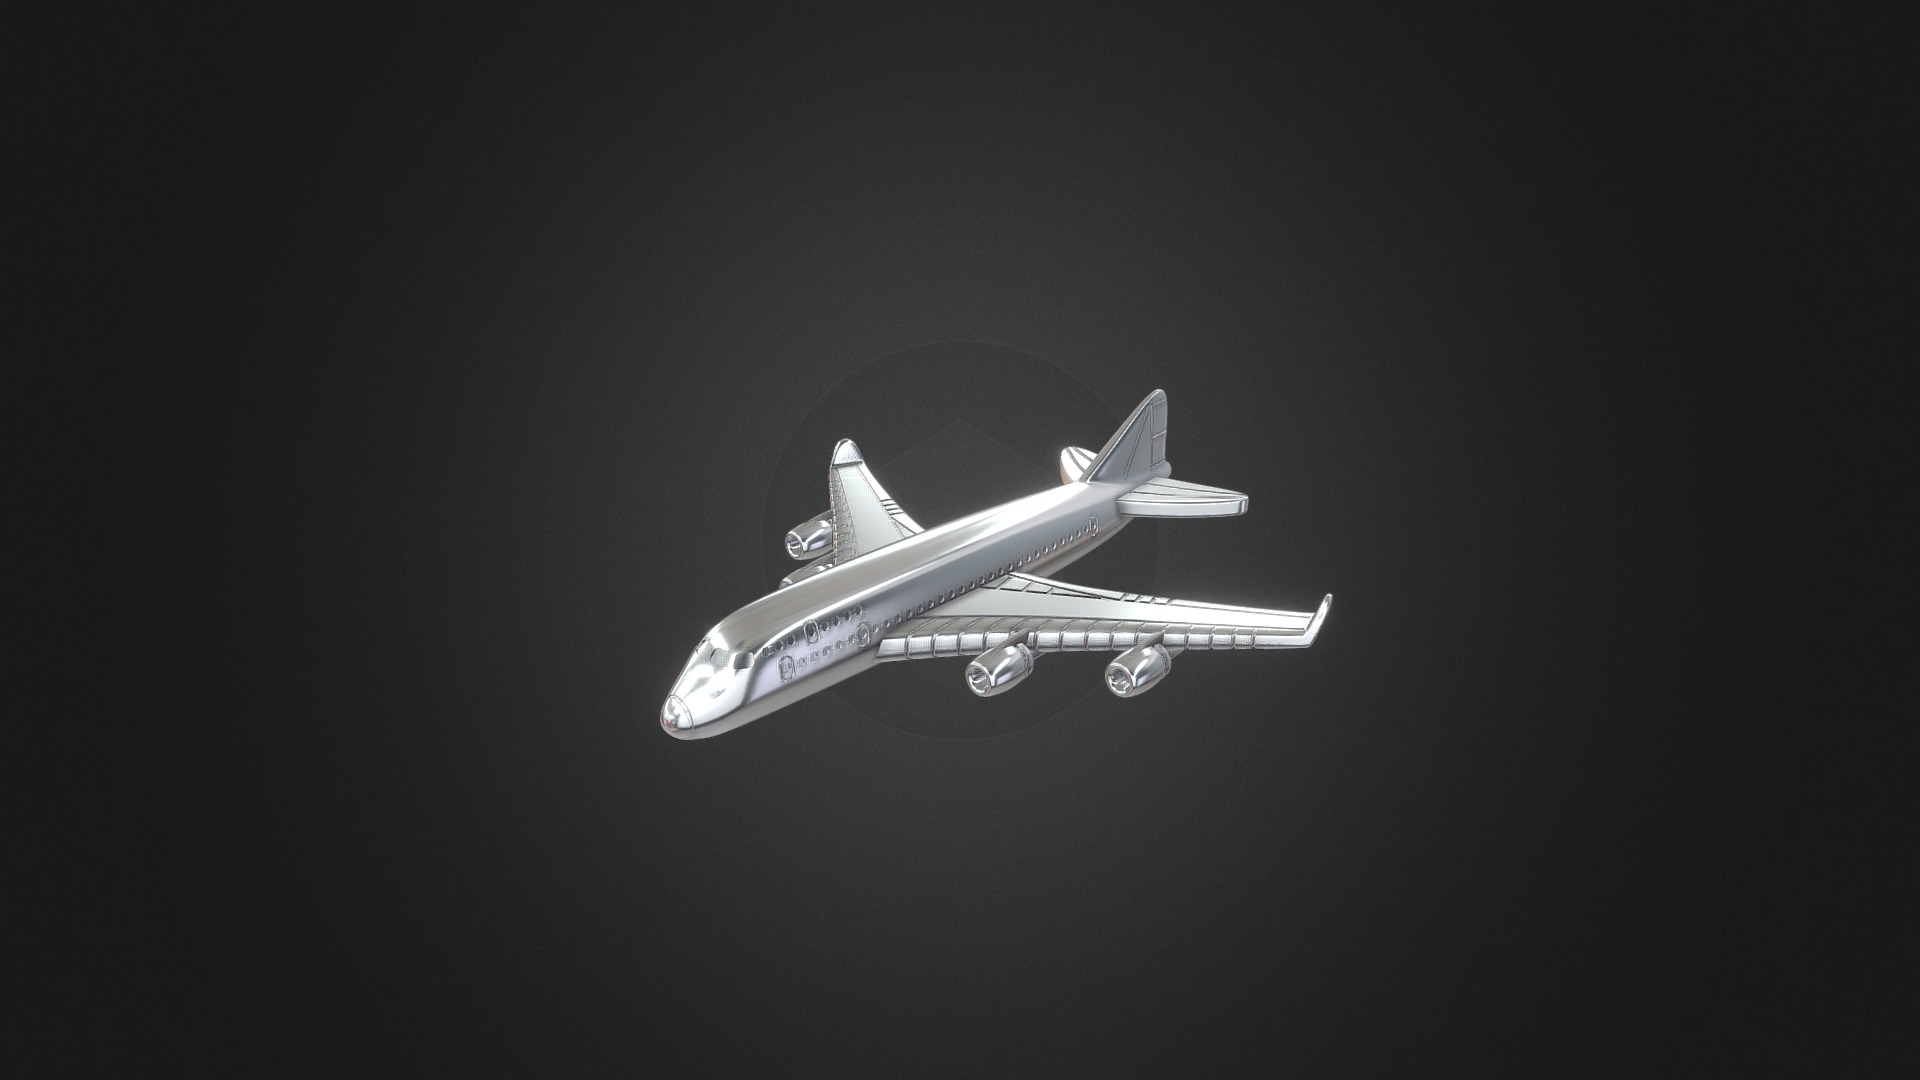 3D model 979 – Pendant Plane - This is a 3D model of the 979 - Pendant Plane. The 3D model is about a jet flying in the sky.